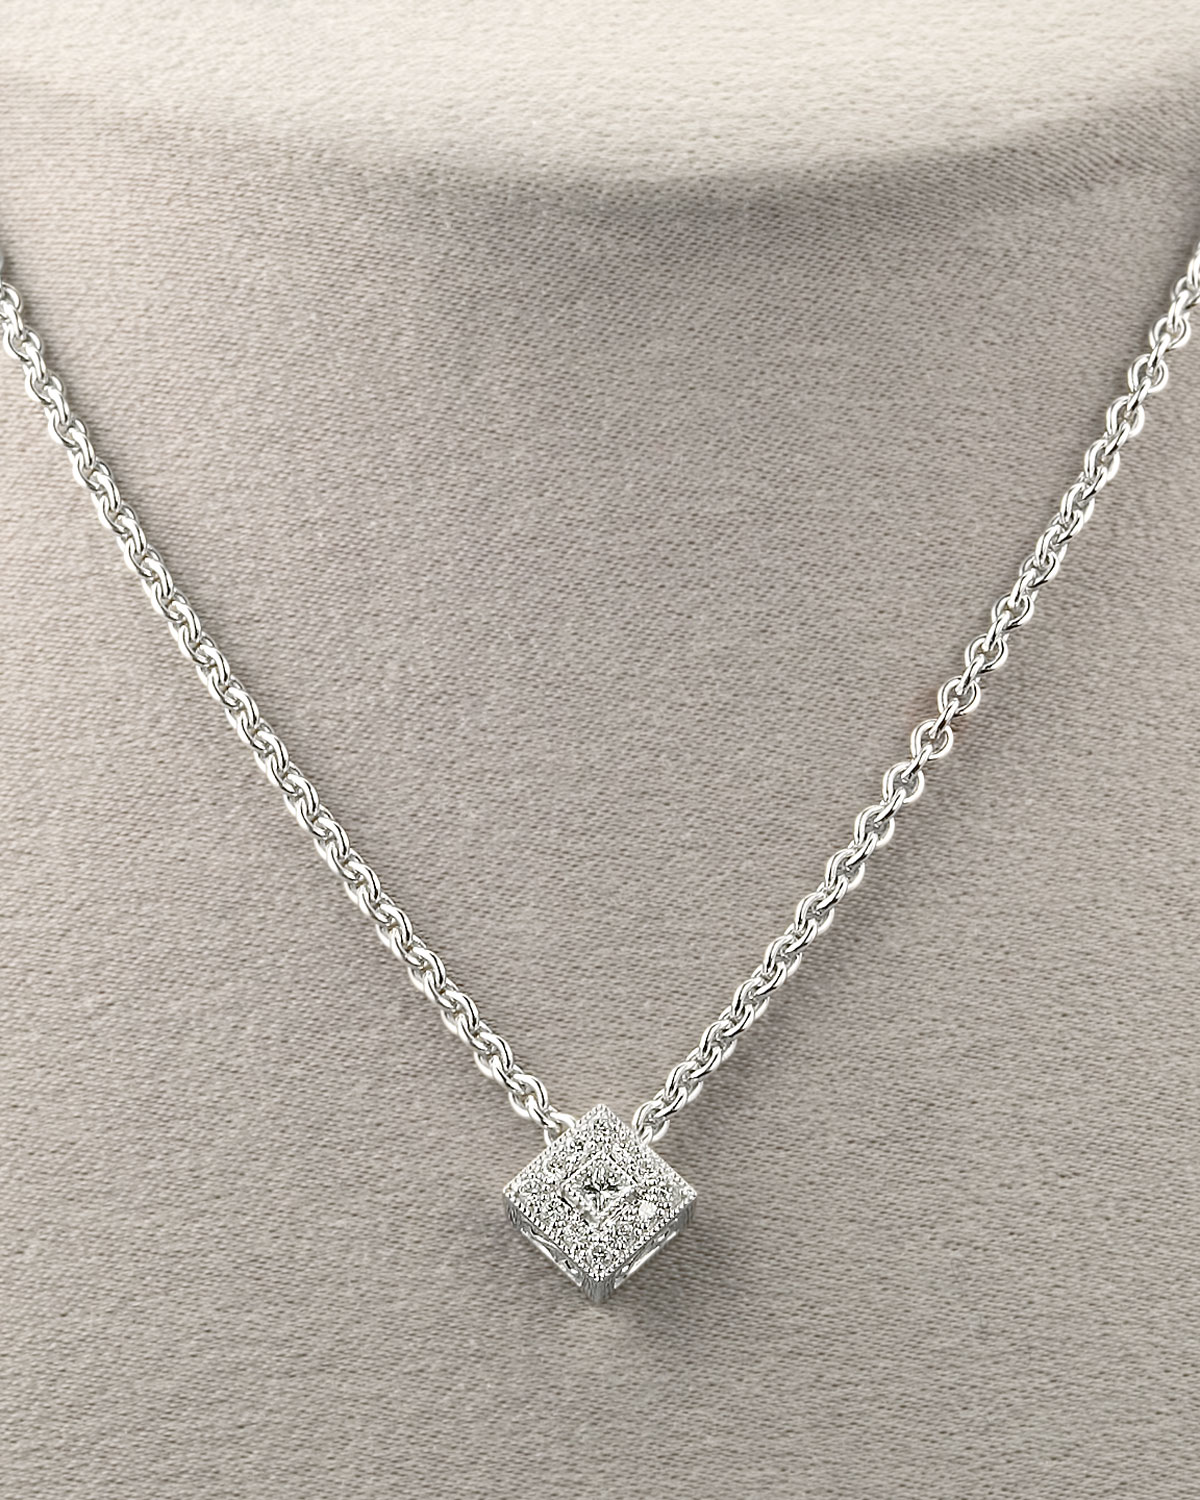 Charriol Square Diamond Necklace in White - Lyst